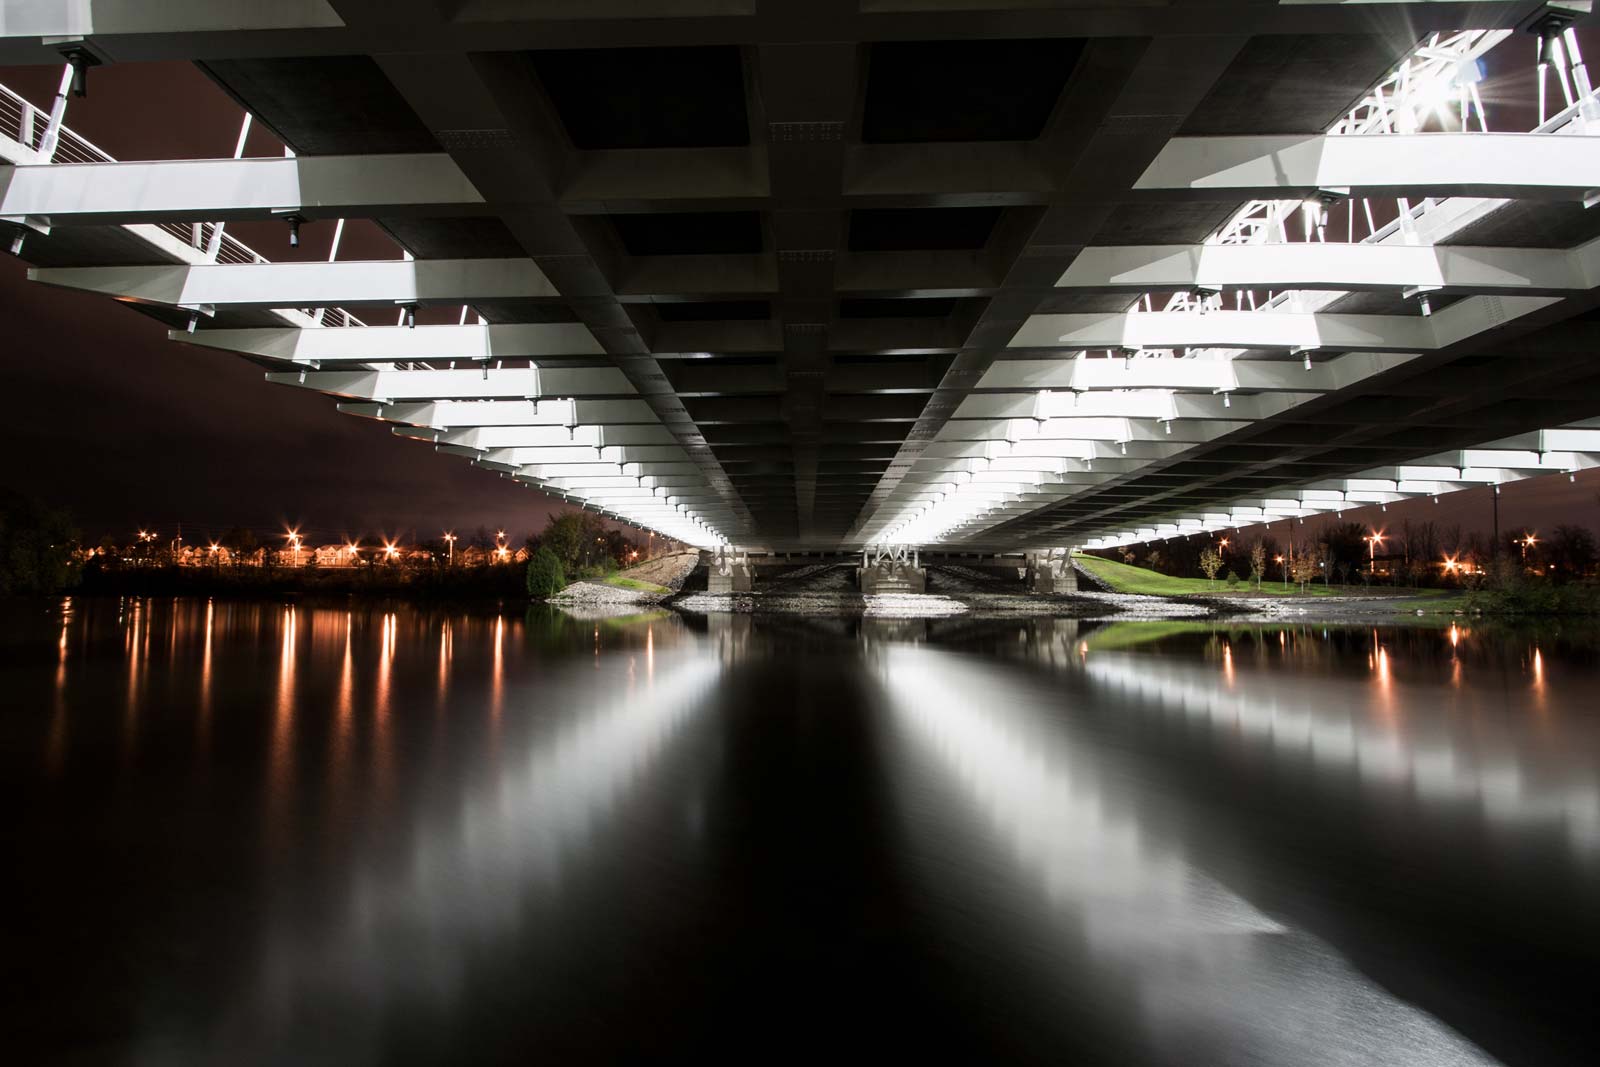 A night time view from under Vimy Bridge in Ottawa